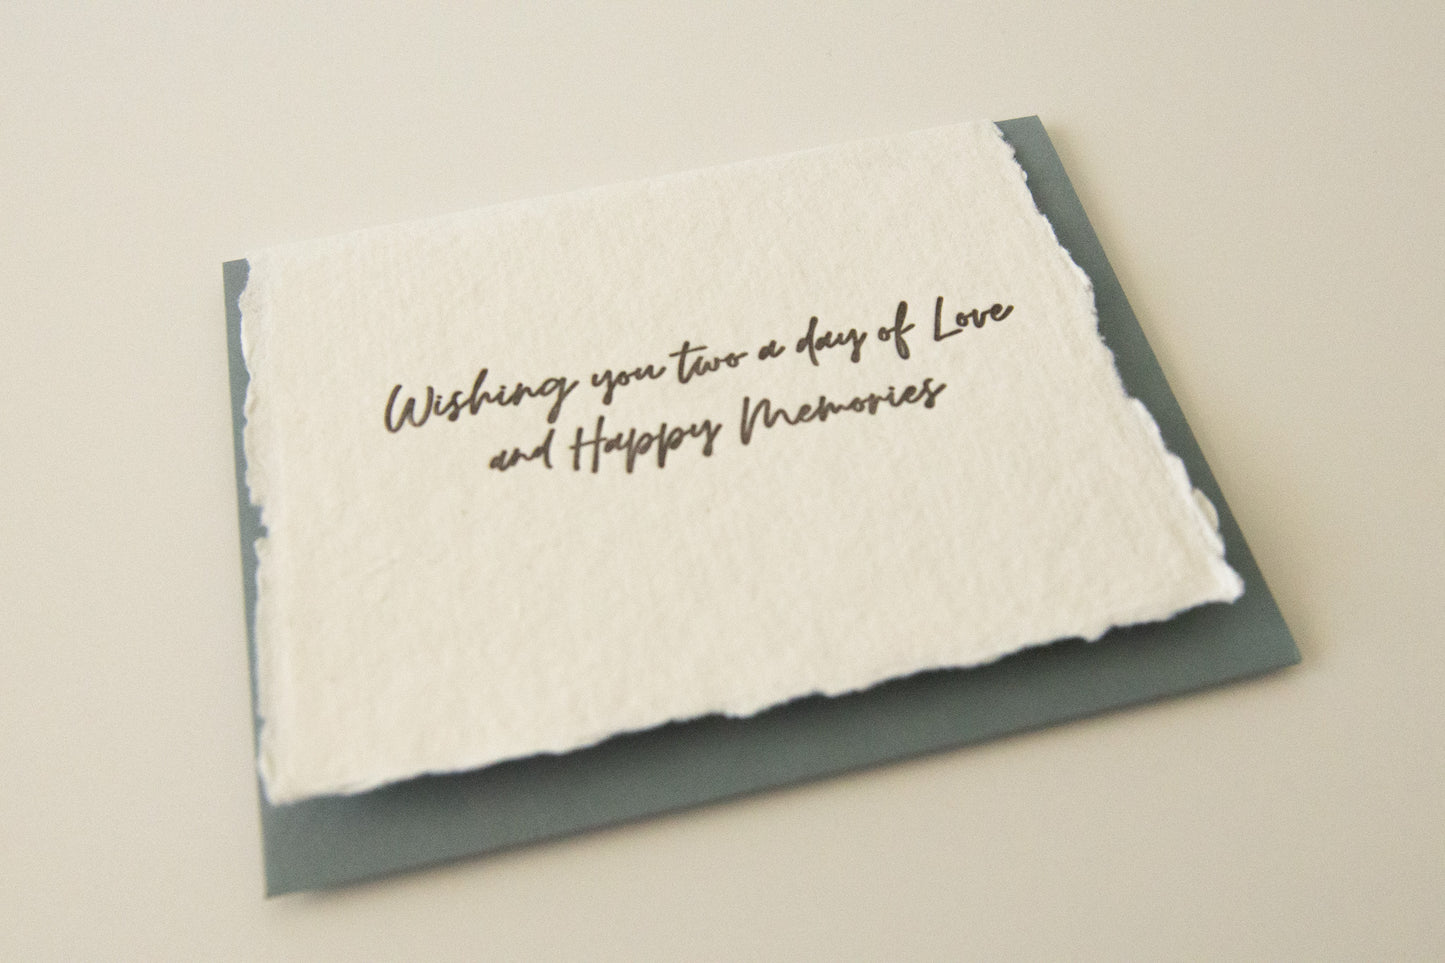 Wishing You Two a Day of Love and Happy Memories Greeting Card